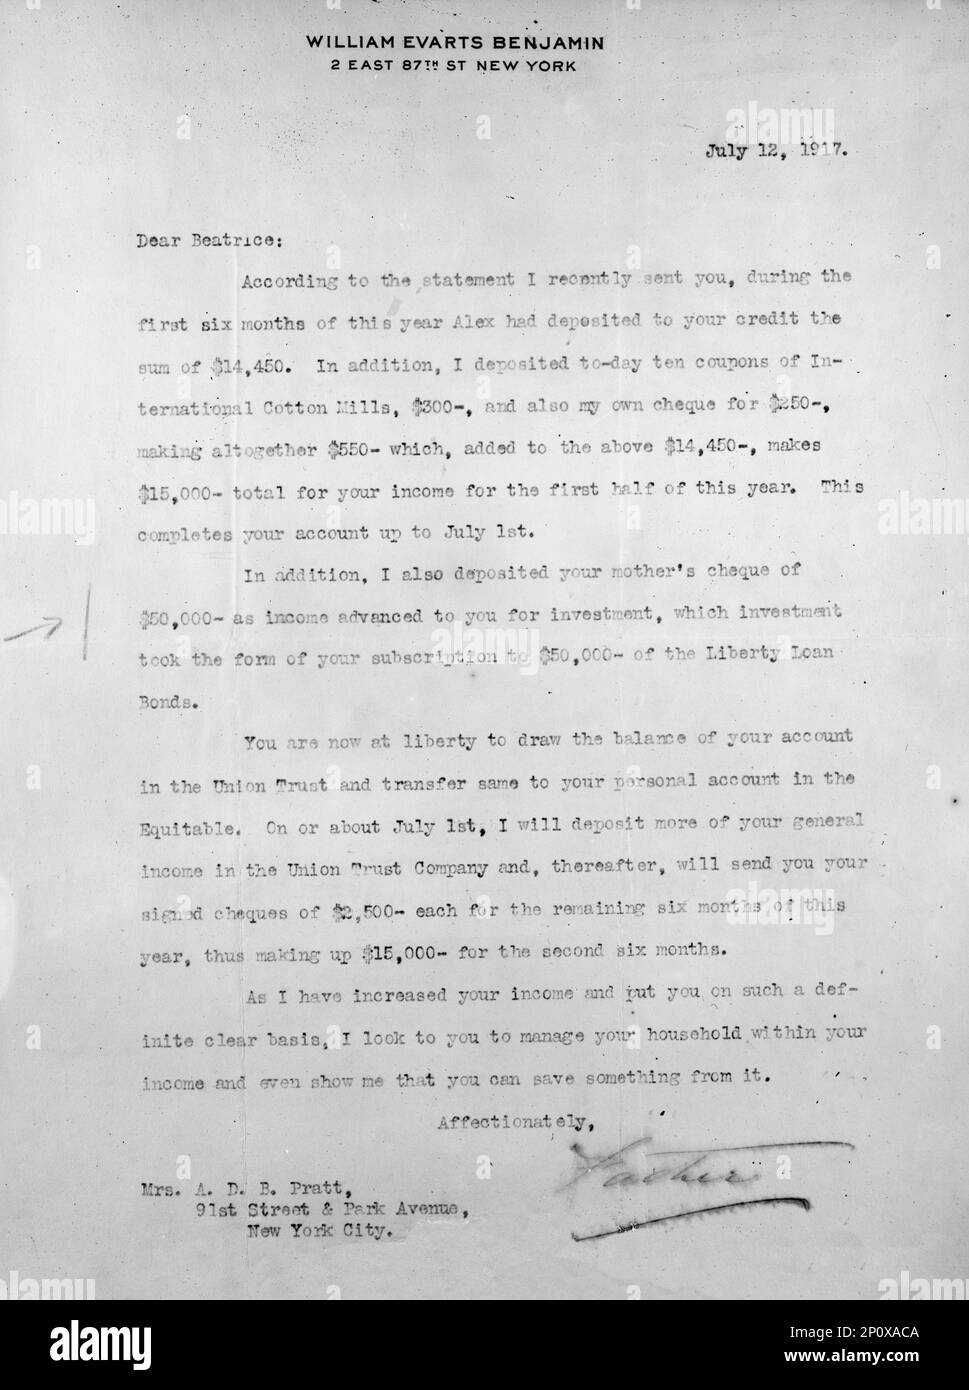 Letter To Mrs. A.D.B. Pratt from publisher and collector William Evarts Benjamin, 12 July 1917. 'Dear Beatrice, according to the statement I recently sent you, during the first six months of this year Alex had deposited to your credit the sum of $14,450. In addition, I deposited to-day ten coupons of International Cotton Mills, $300-, and also my own cheque for $250-, making altogether $550- which, added to the above $14.450-, makes $15,000- total for your income for the first half of this year...I also deposited your mother's cheque of $50,000-...You are now at liberty to draw the balance of Stock Photo